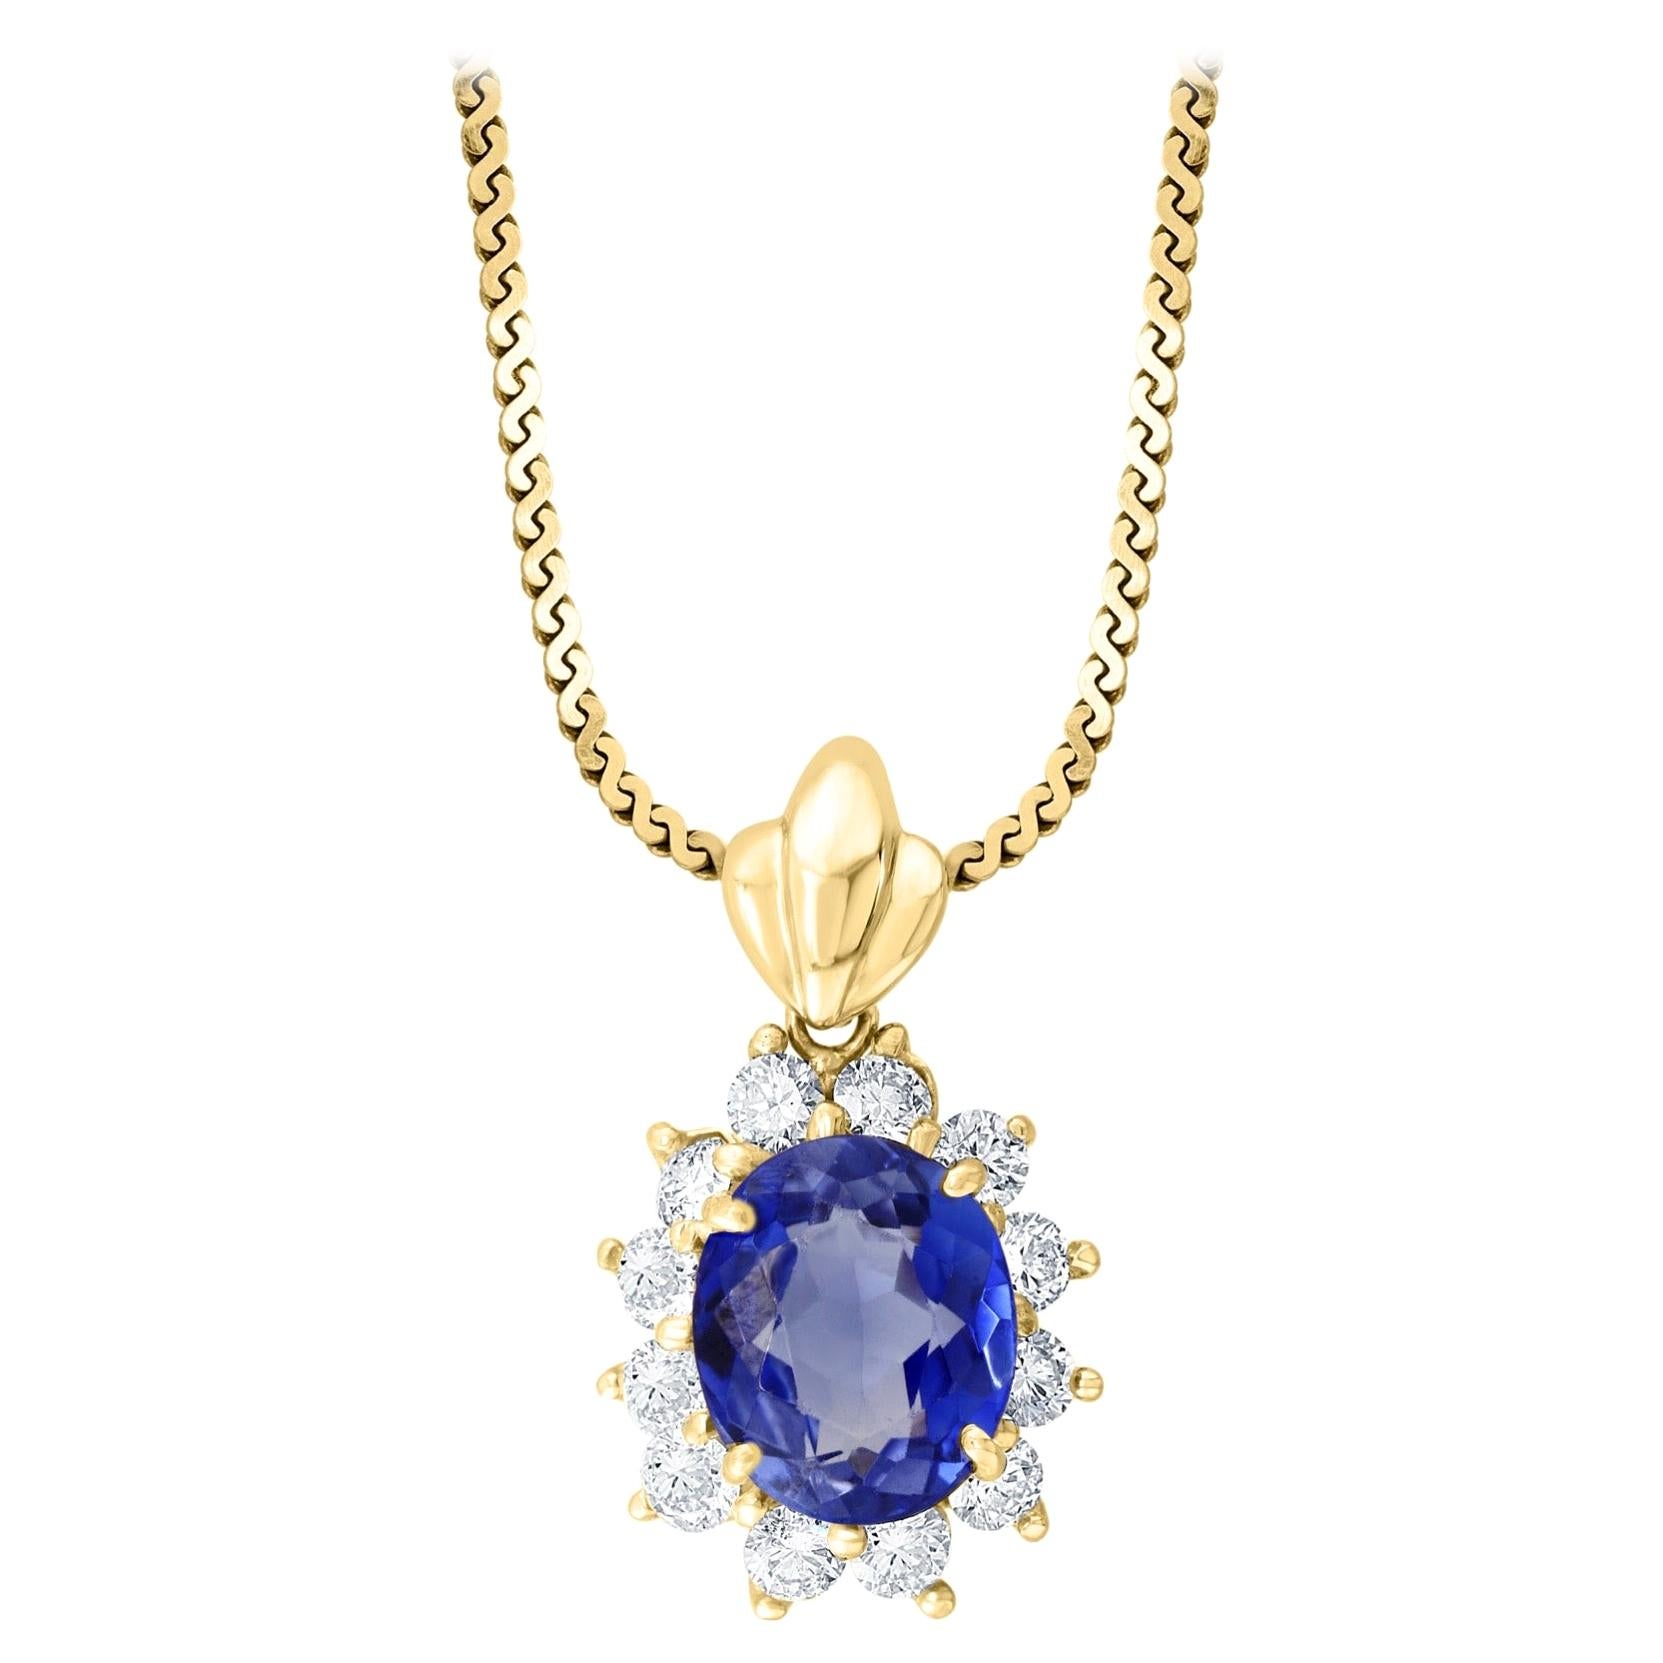 3 Carat Tanzanite and 1 Ct Diamond Pendant or Necklace 14 Karat Yellow Gold For Sale